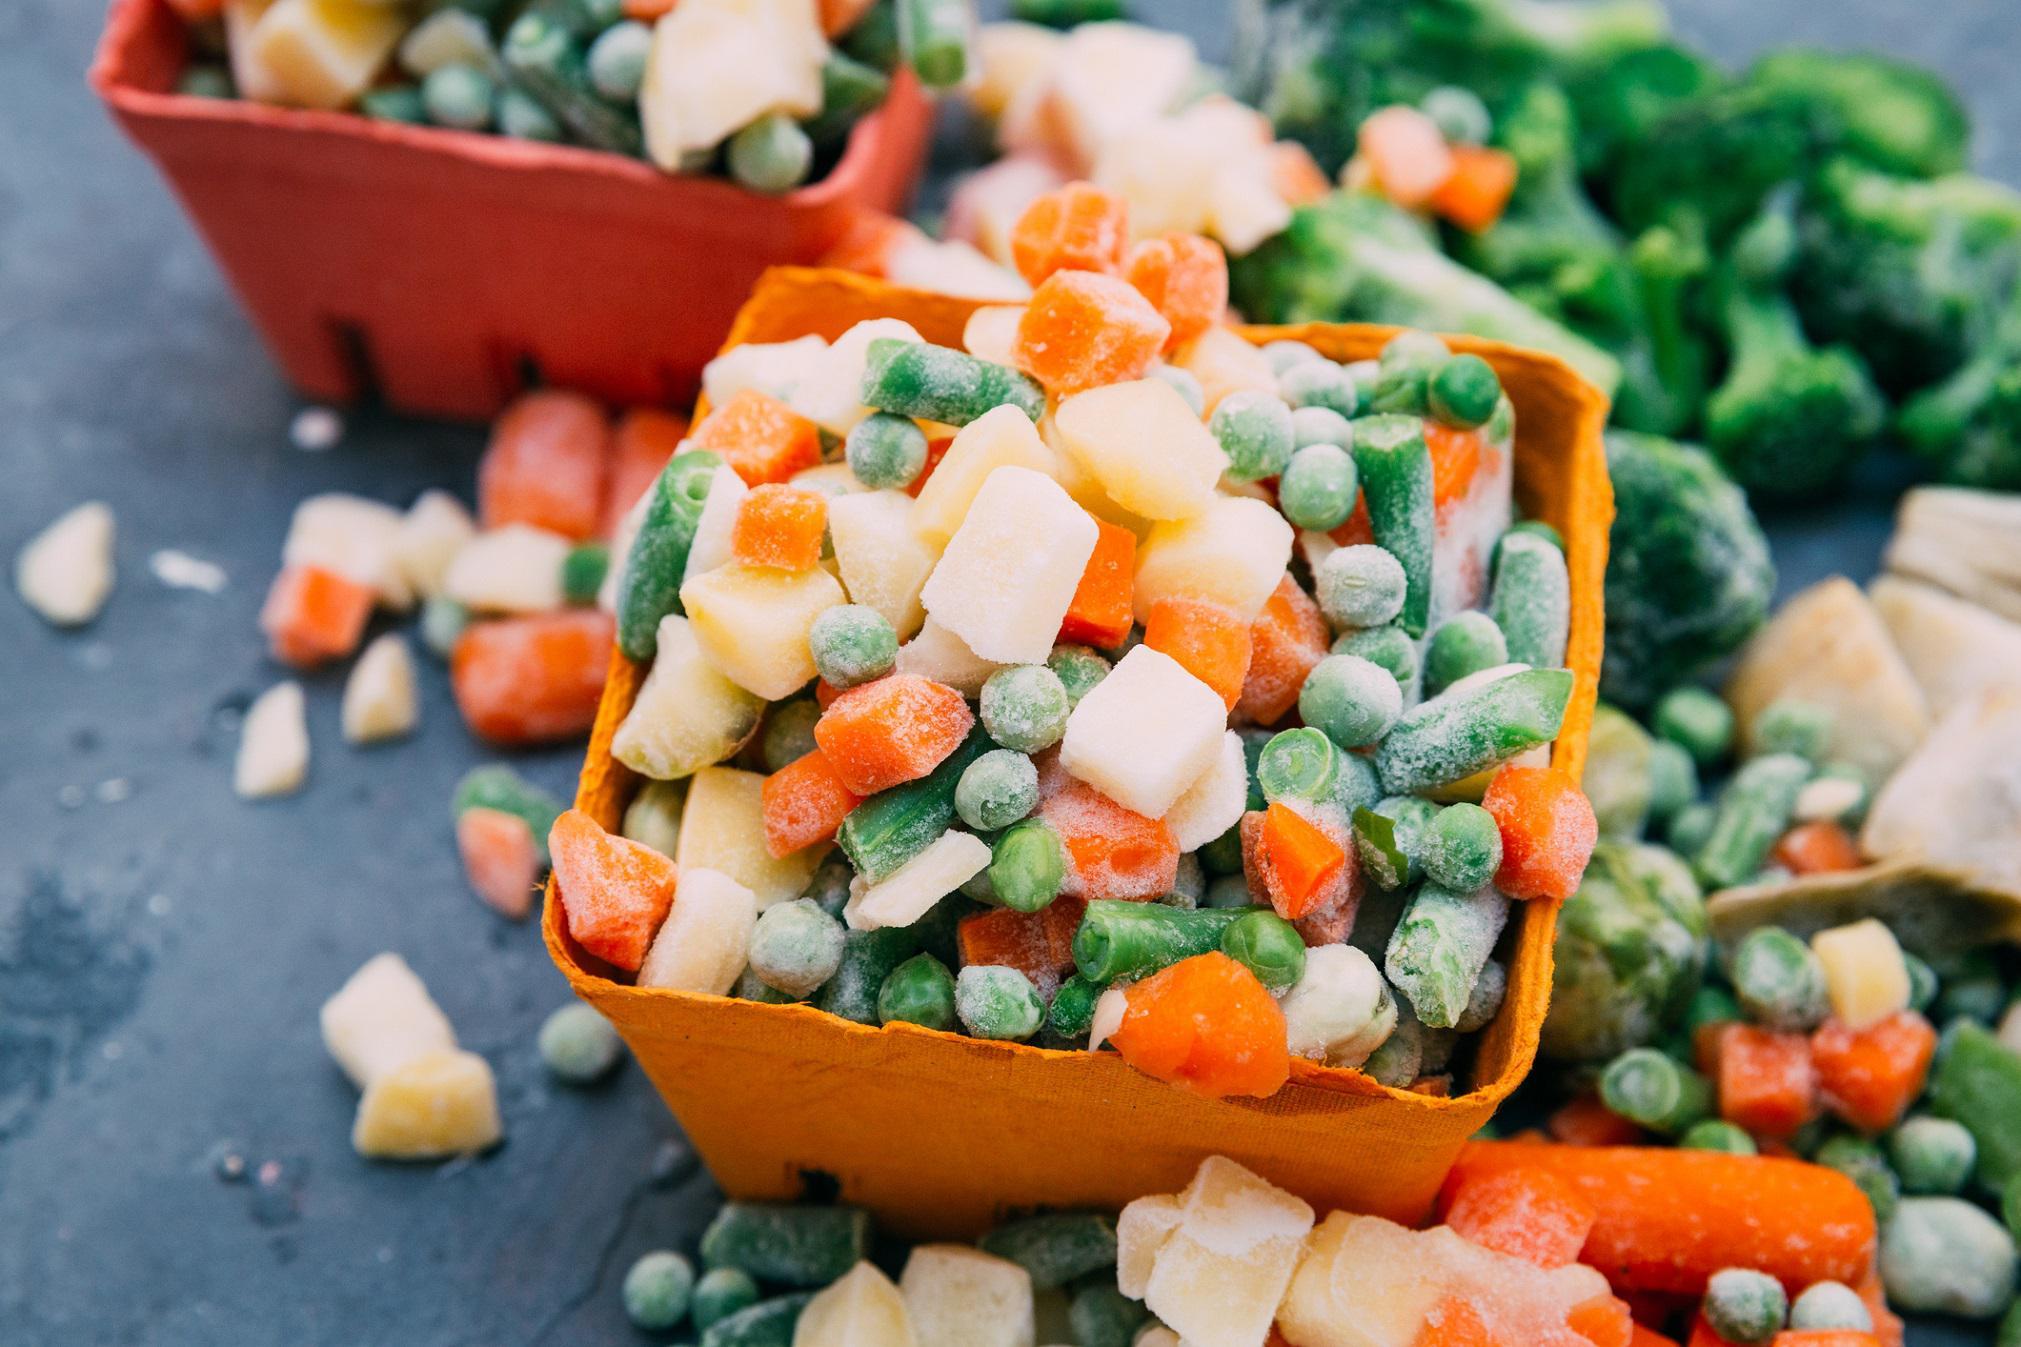 Are Frozen Vegetables as Healthy as Fresh Produce?